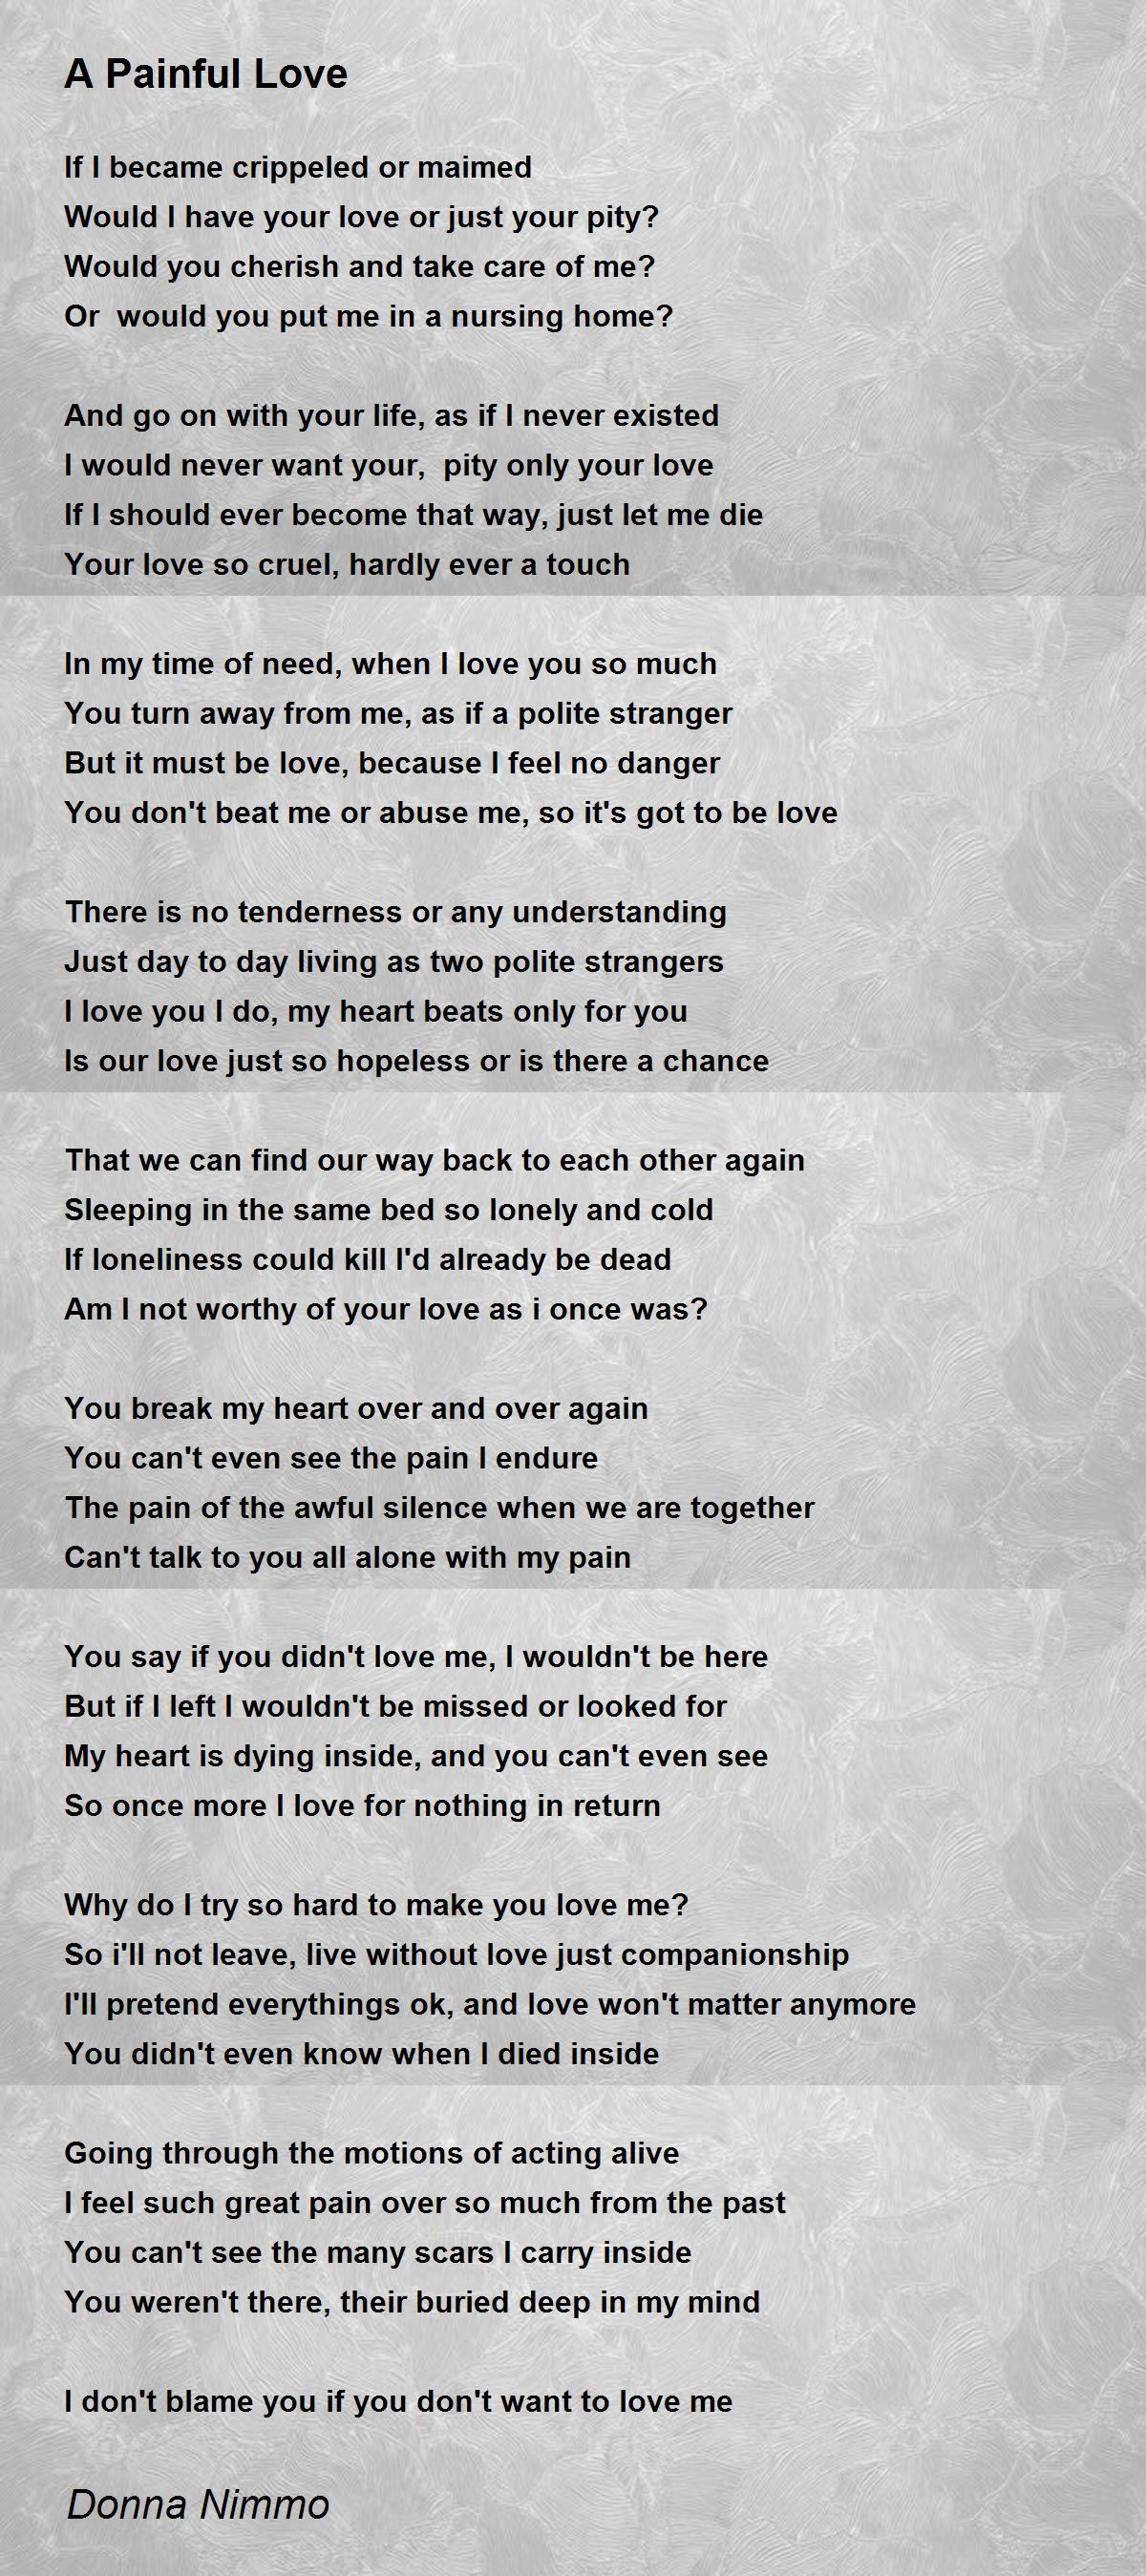 Love hurting you poems someone about 58 Absolutely